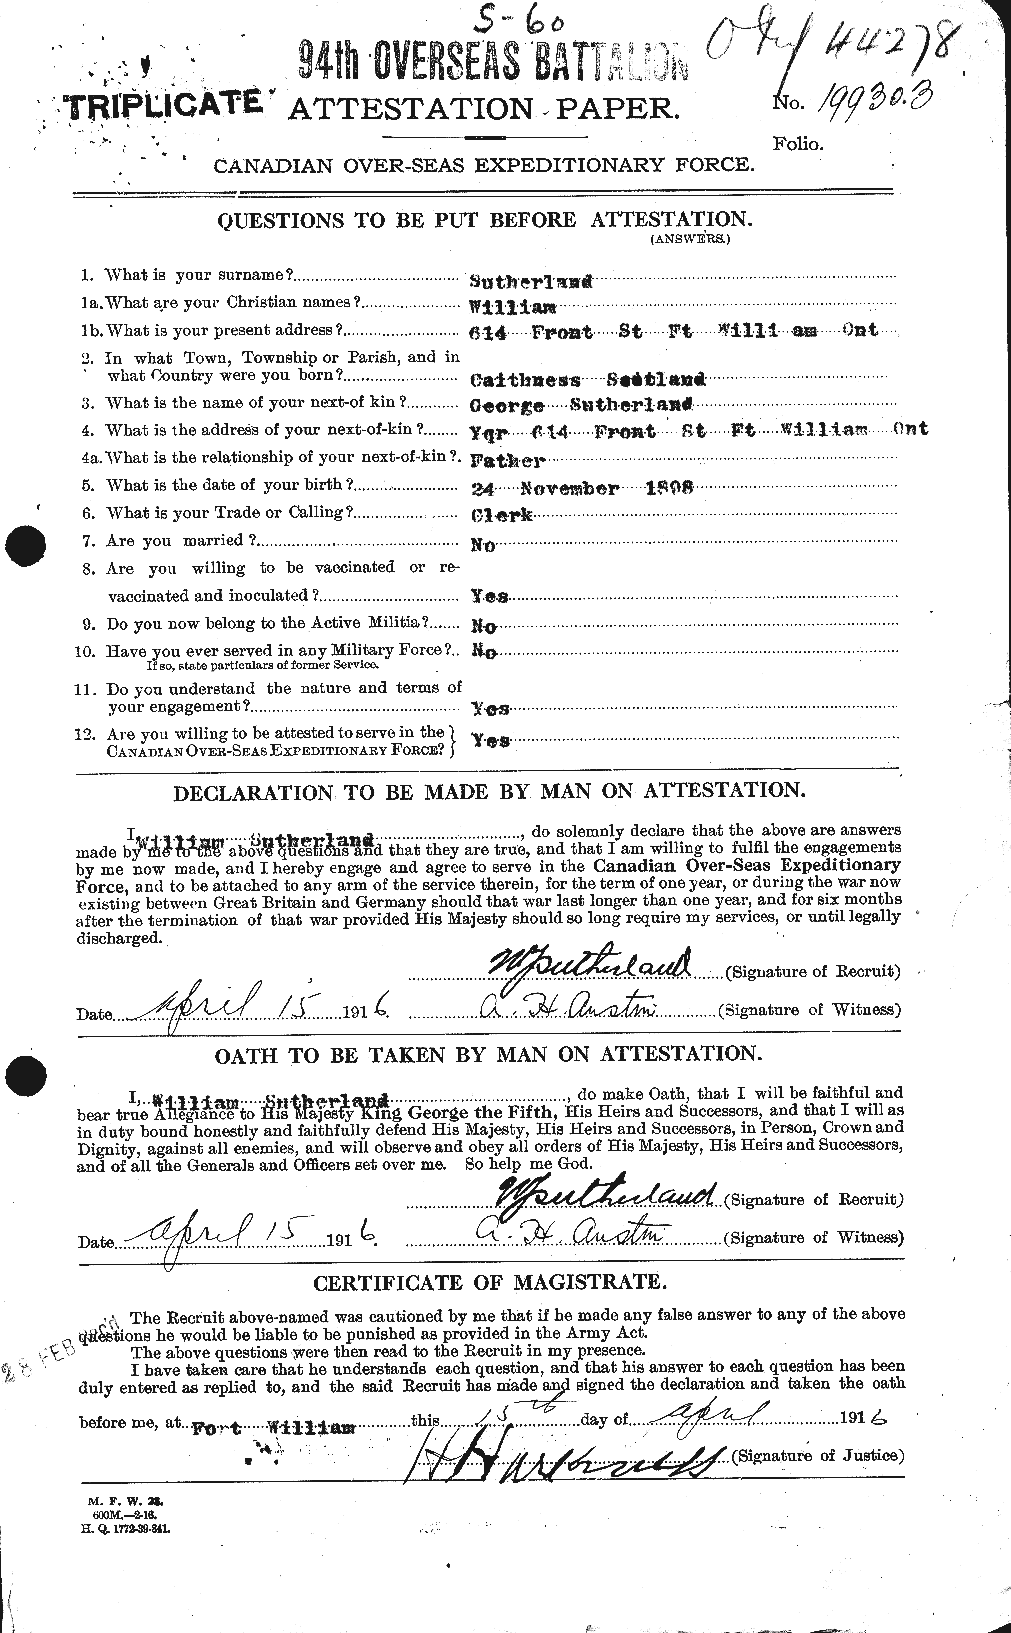 Personnel Records of the First World War - CEF 126518a